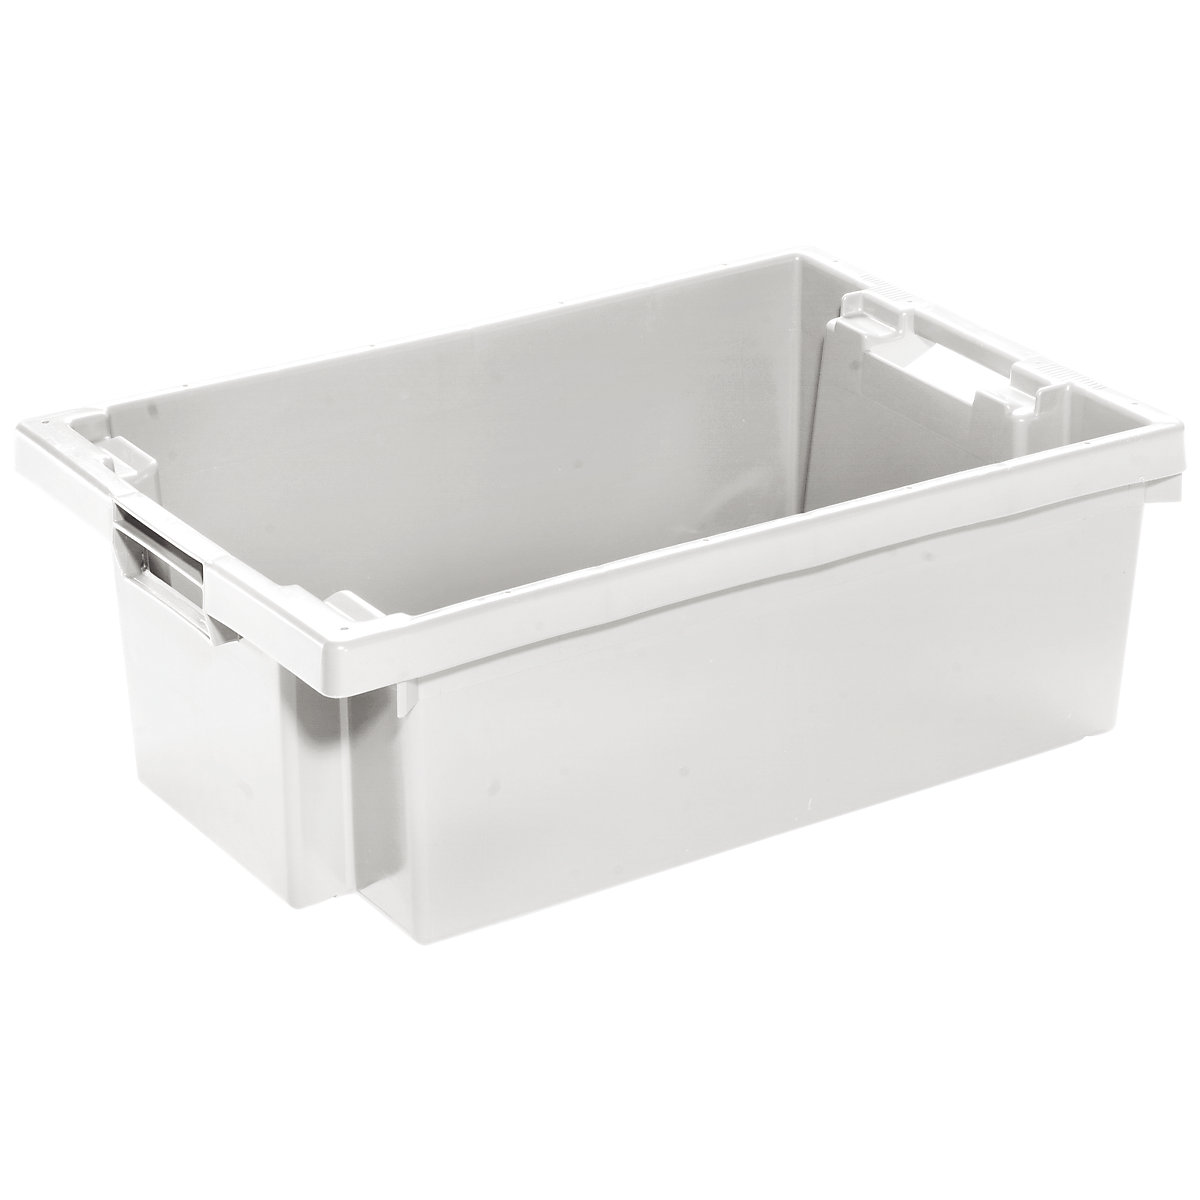 Stack/nest container made of HDPE, capacity 32 l, solid walls and base, natural white